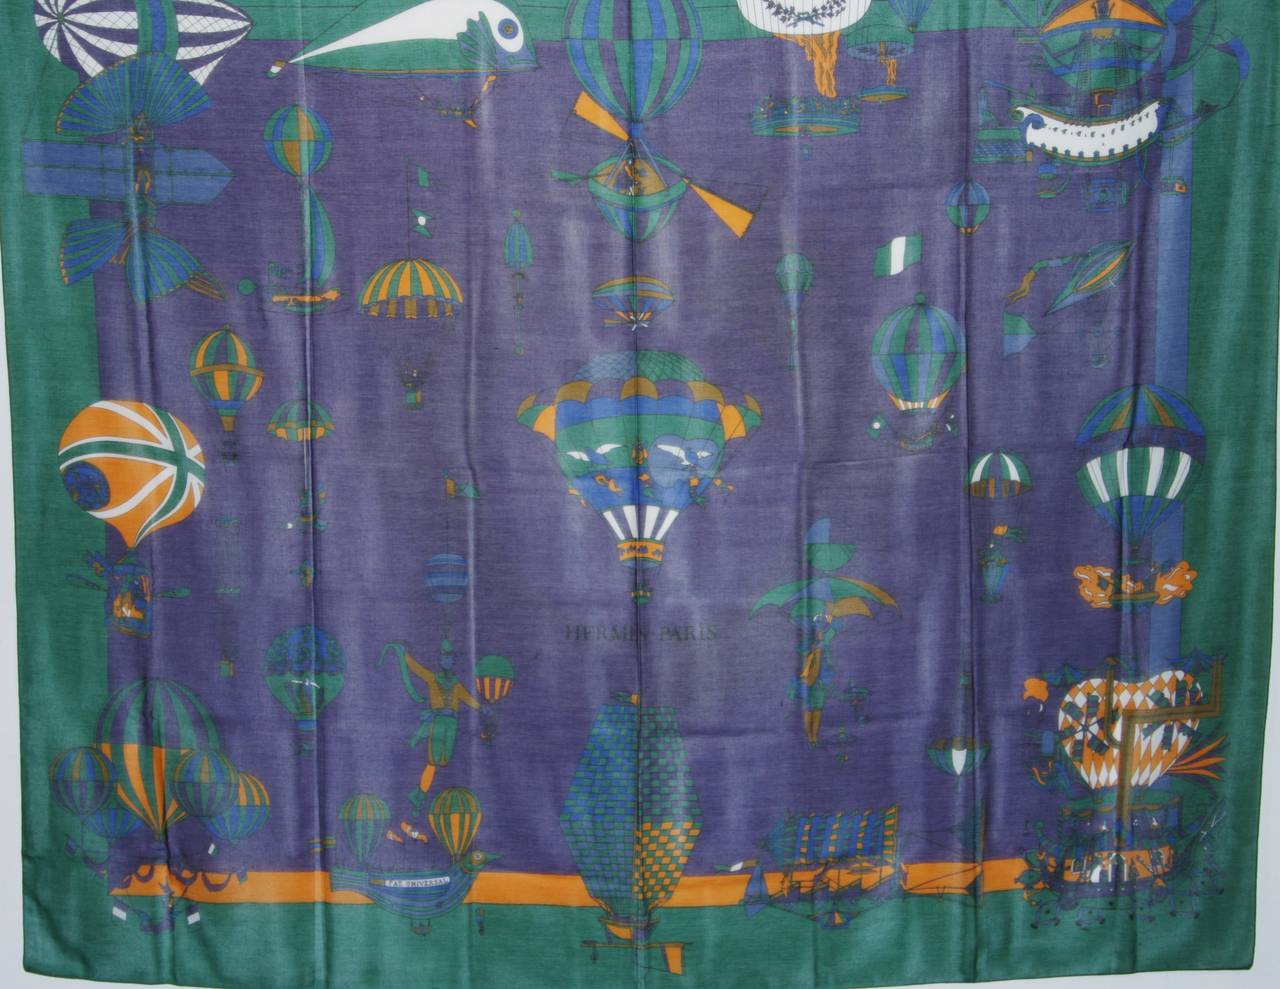 Hermes 58 x 70 Purple with Green Border Cotton Balloon Print Scarf or Wrap 2